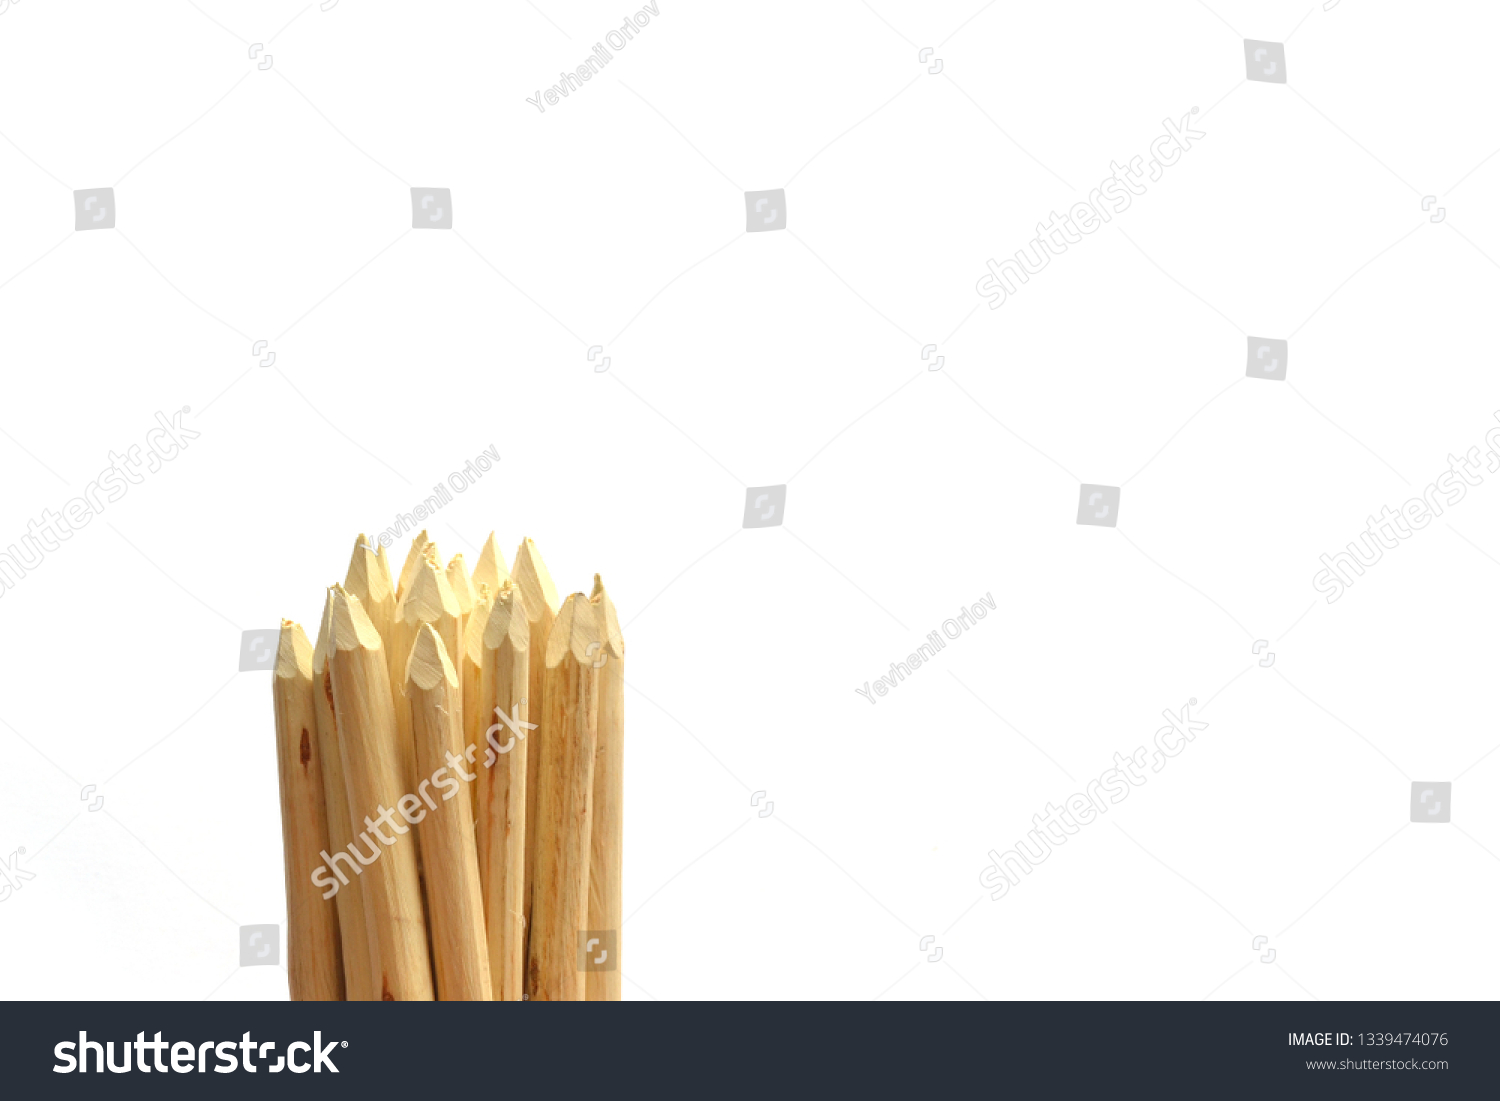 Wooden stakes on a white background. #1339474076